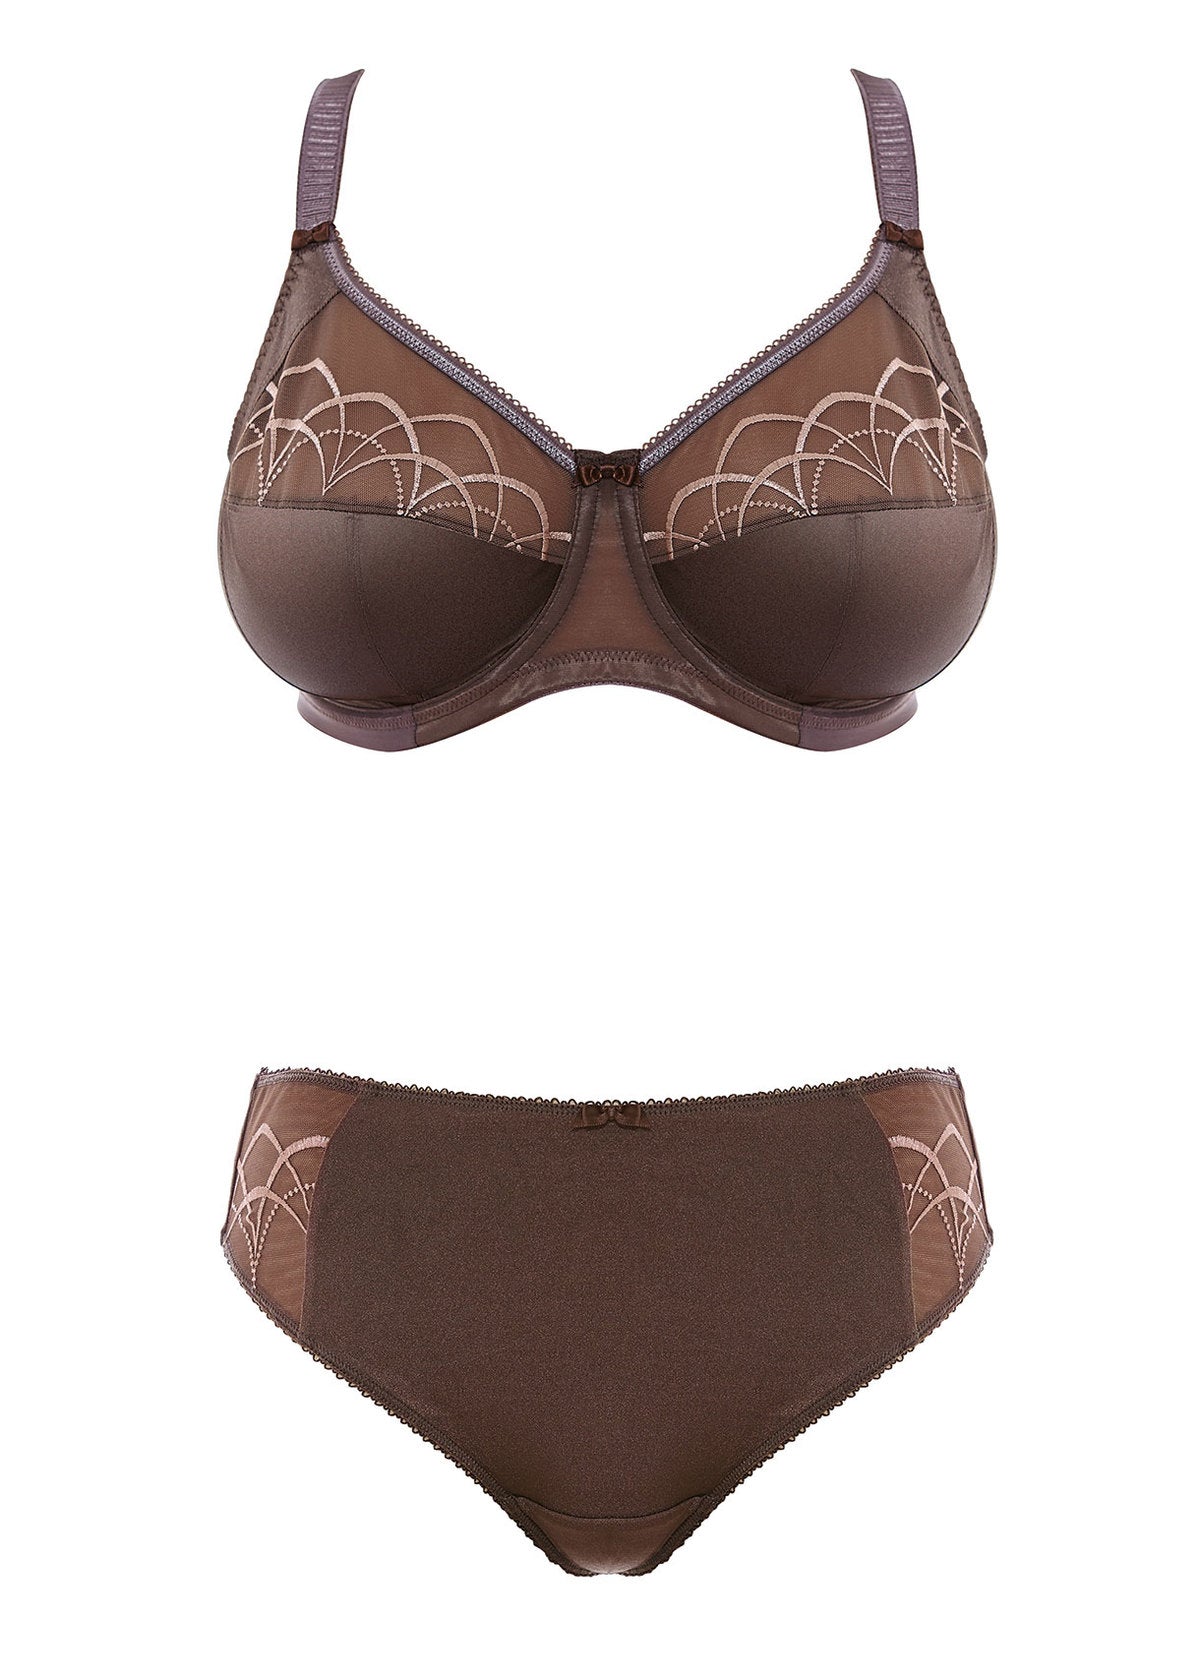 Cate Full Cup Banded Bra - Pecan